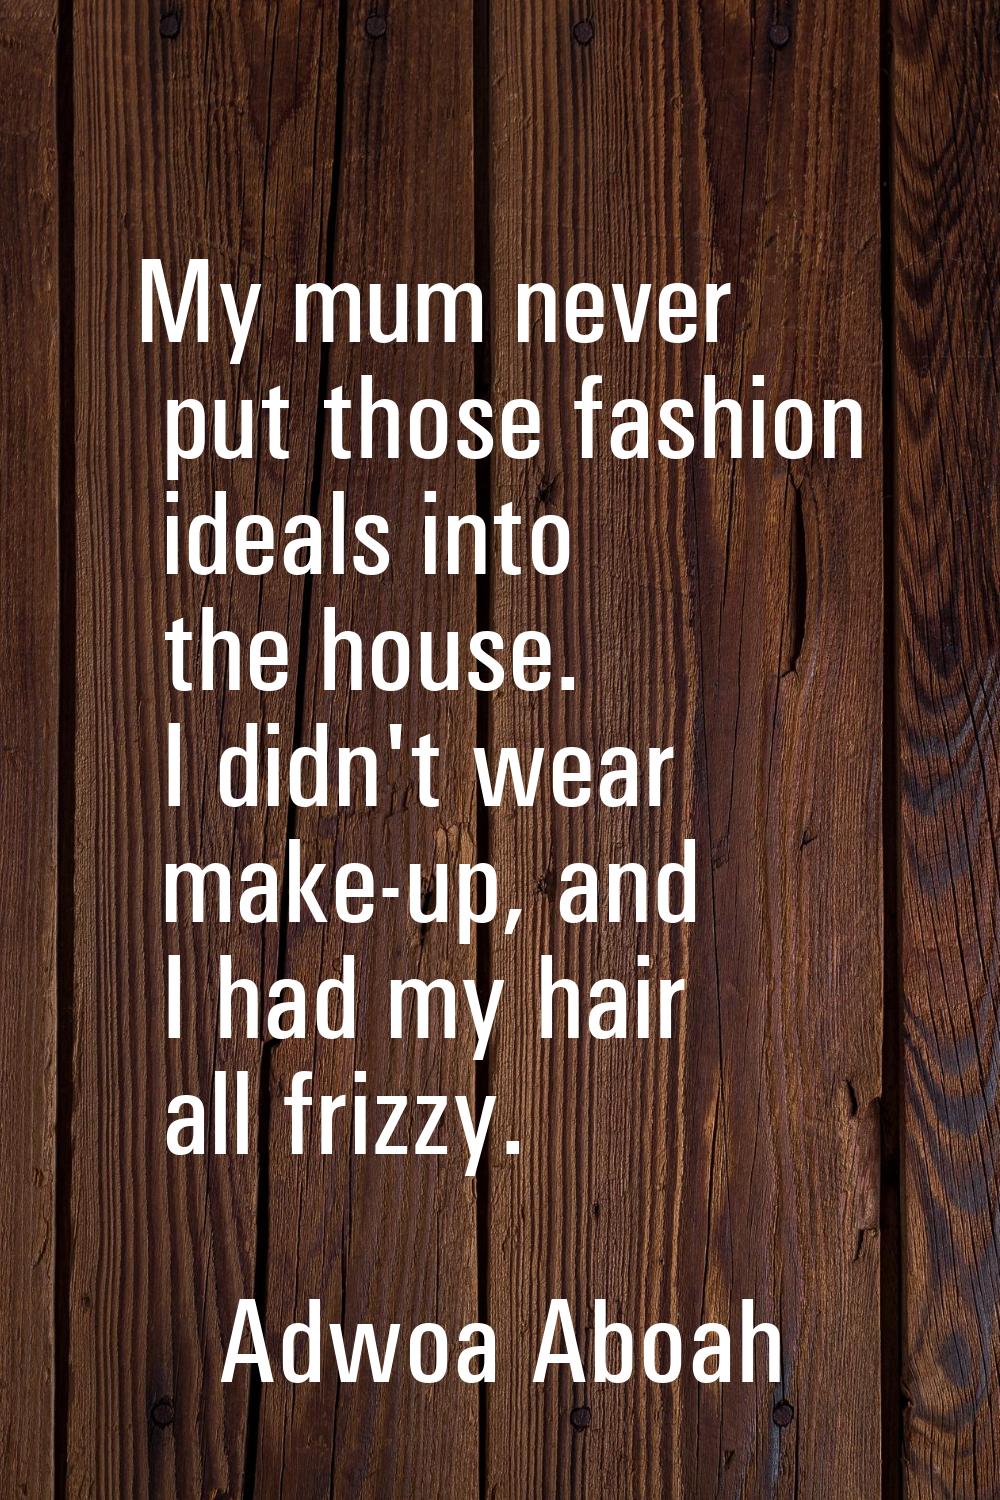 My mum never put those fashion ideals into the house. I didn't wear make-up, and I had my hair all 